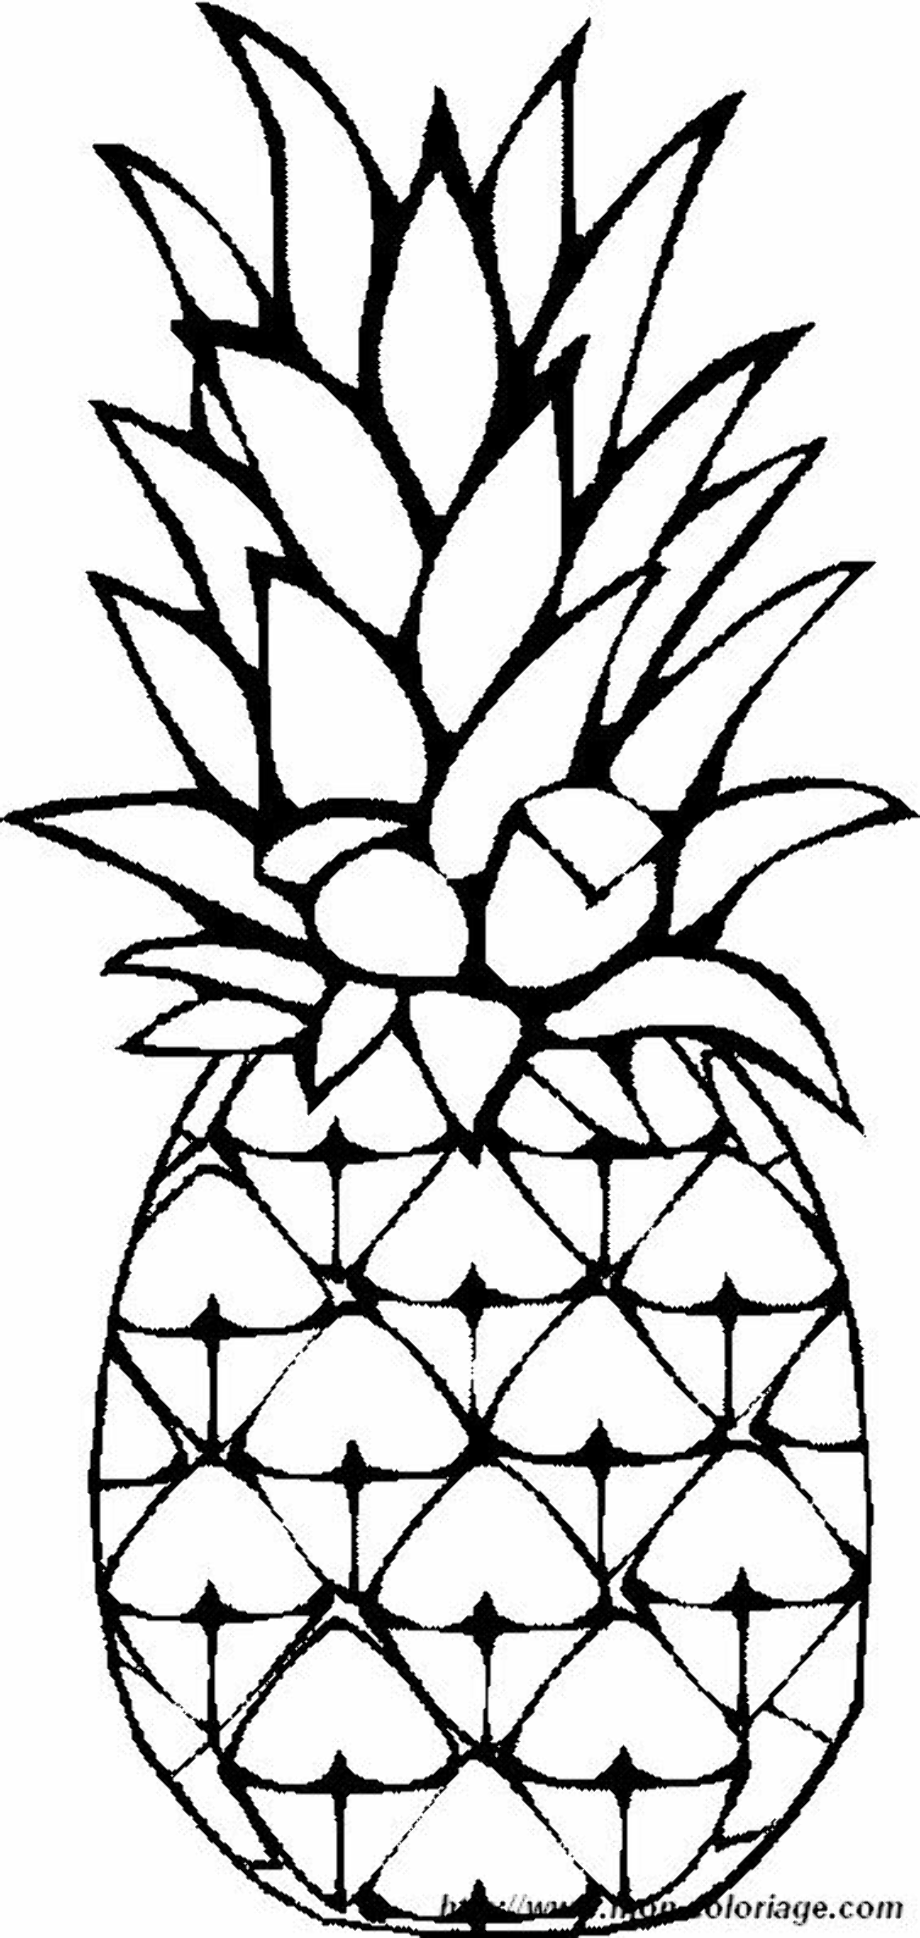 Download High Quality pineapple clipart drawing Transparent PNG Images